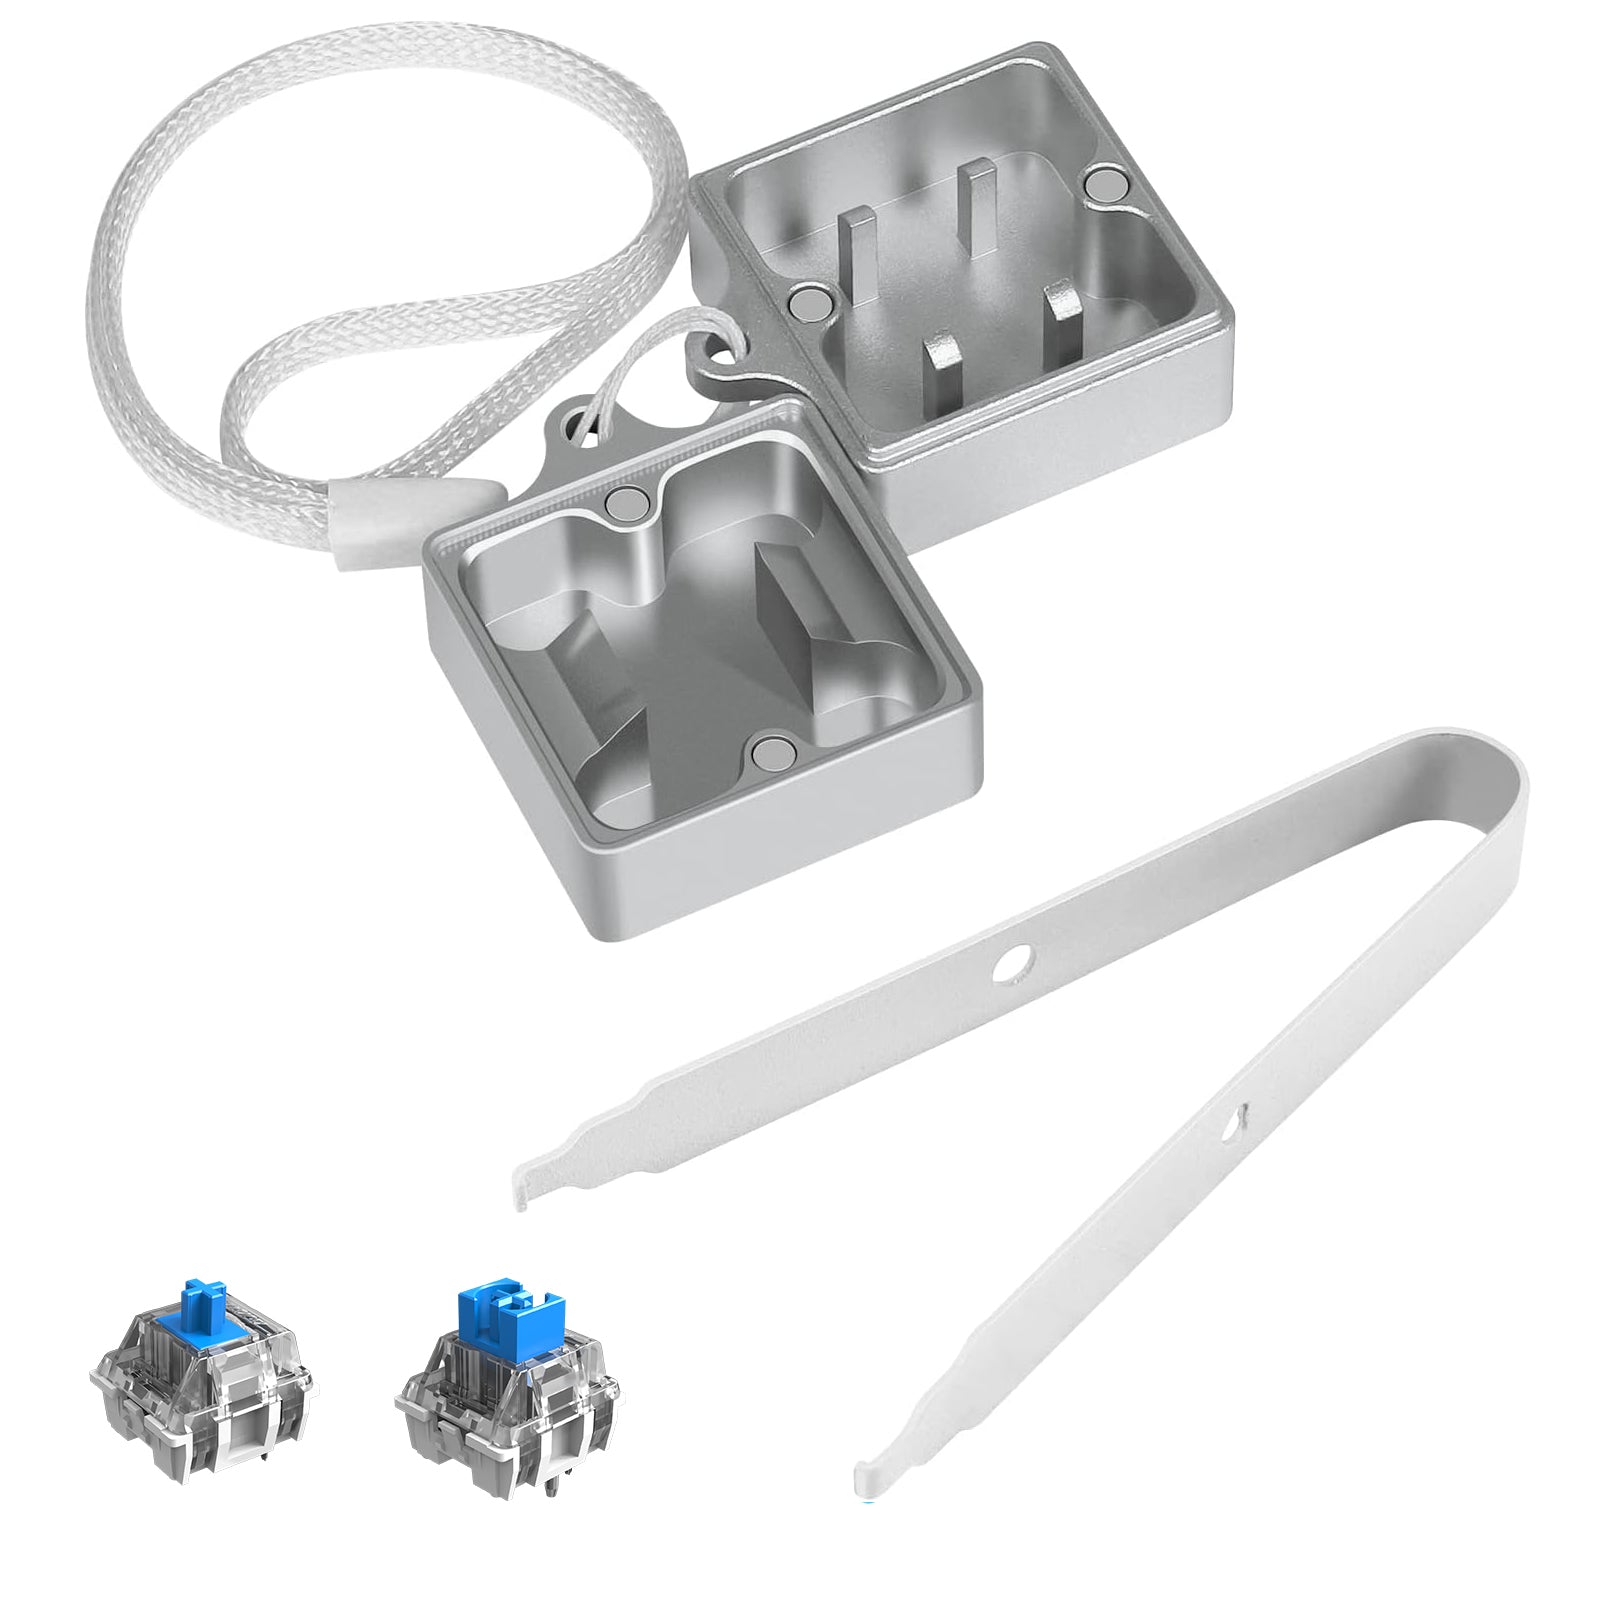 Switch Opener Kit with Switch Puller, Aluminum Mechanical Keyboard Swi